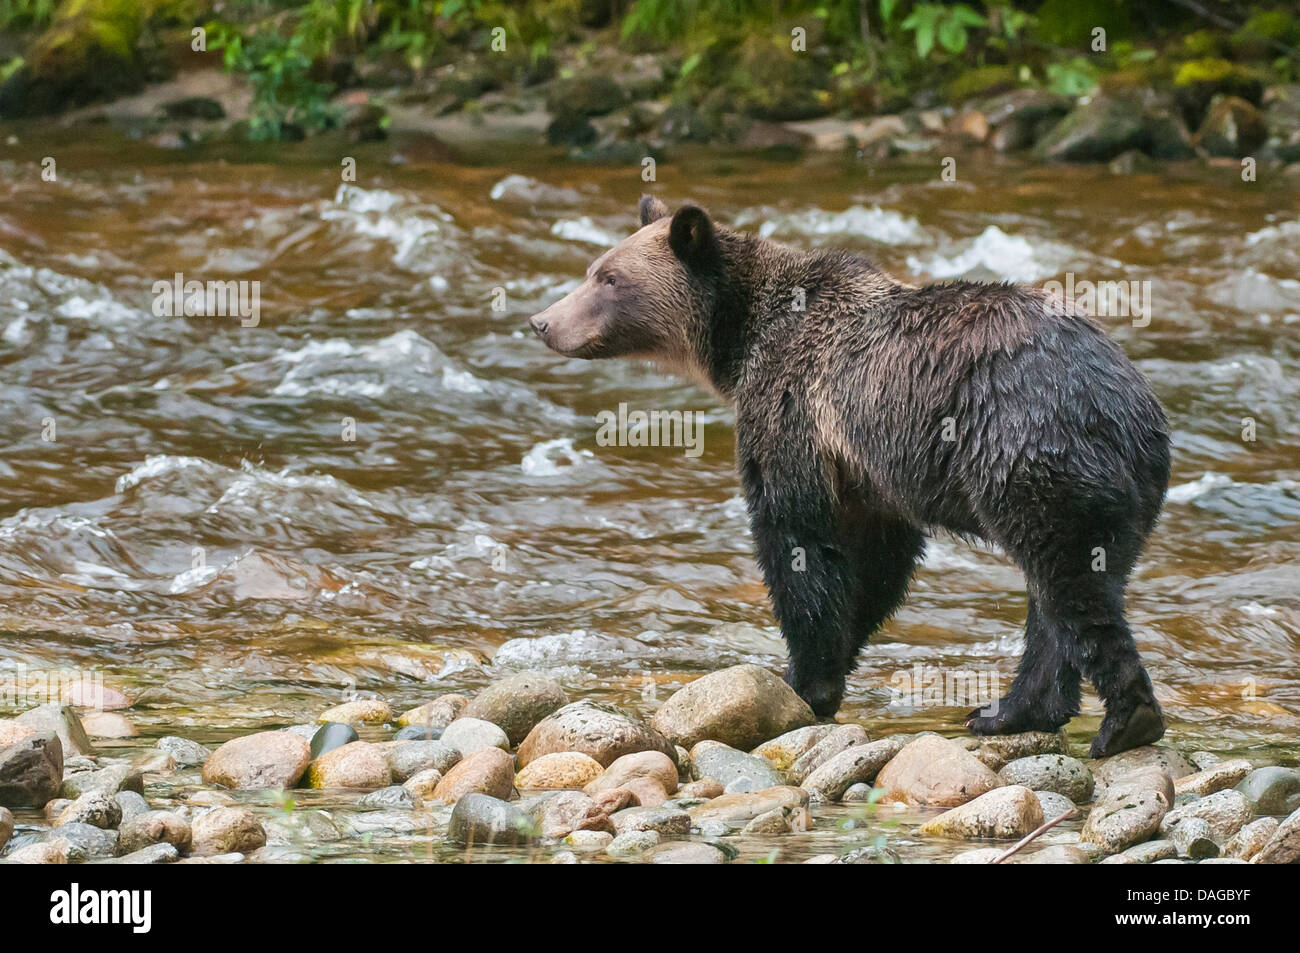 Brown or grizzly bear (Ursus arctos) fishing for salmon in Great Bear Rainforest, British Columbia, Canada. Stock Photo